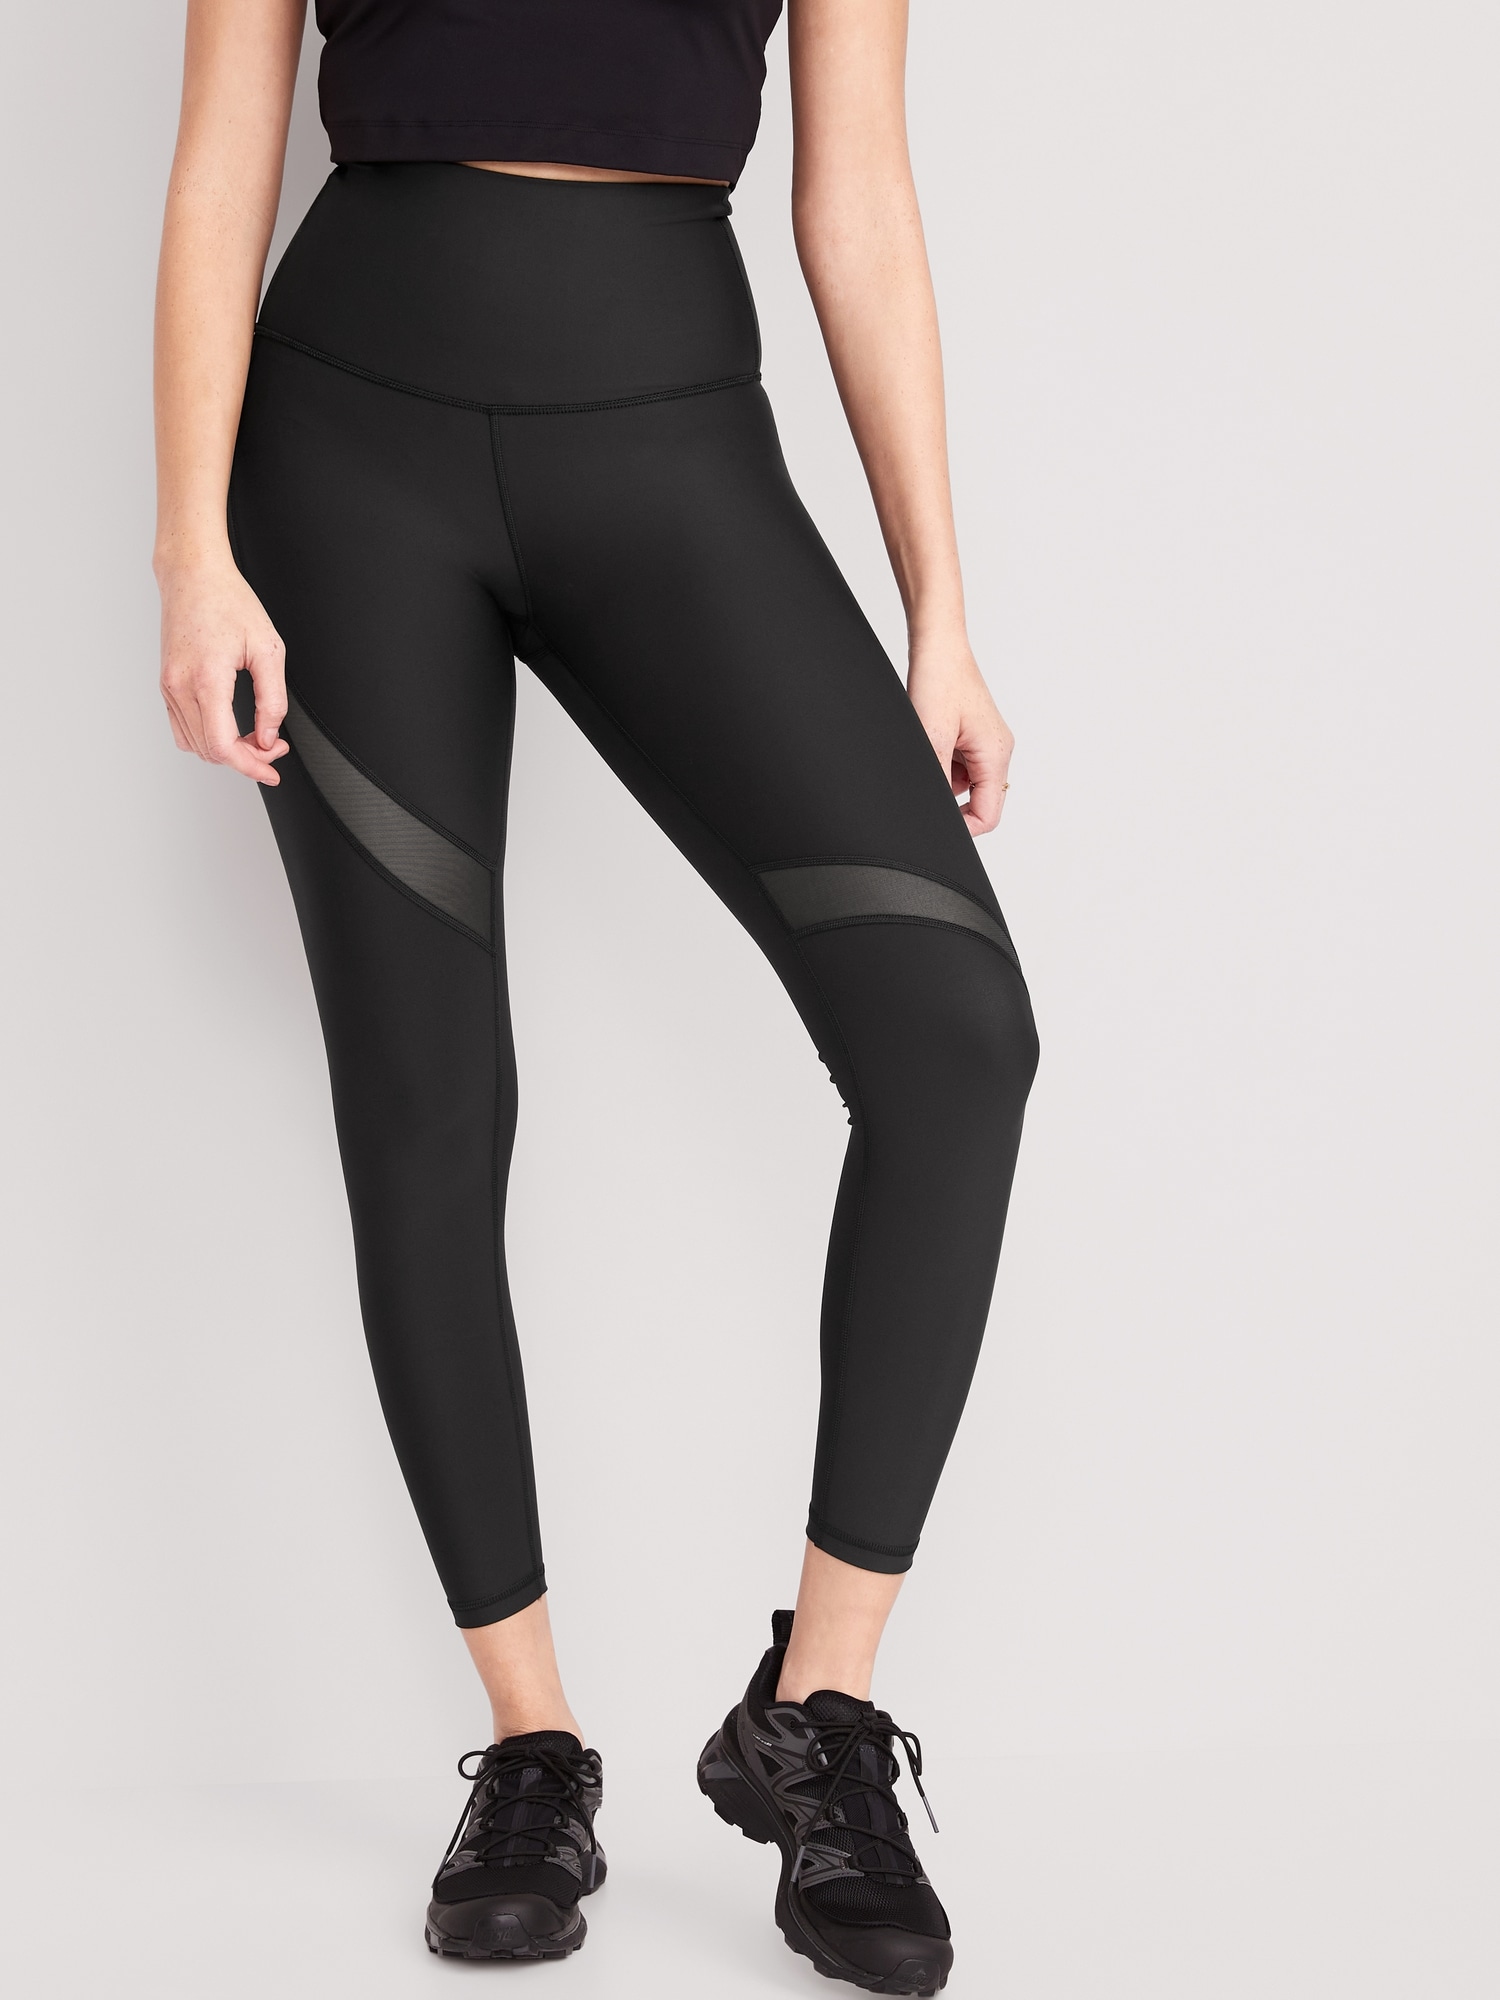 Old Navy Extra High-Waisted PowerSoft Leggings for Women